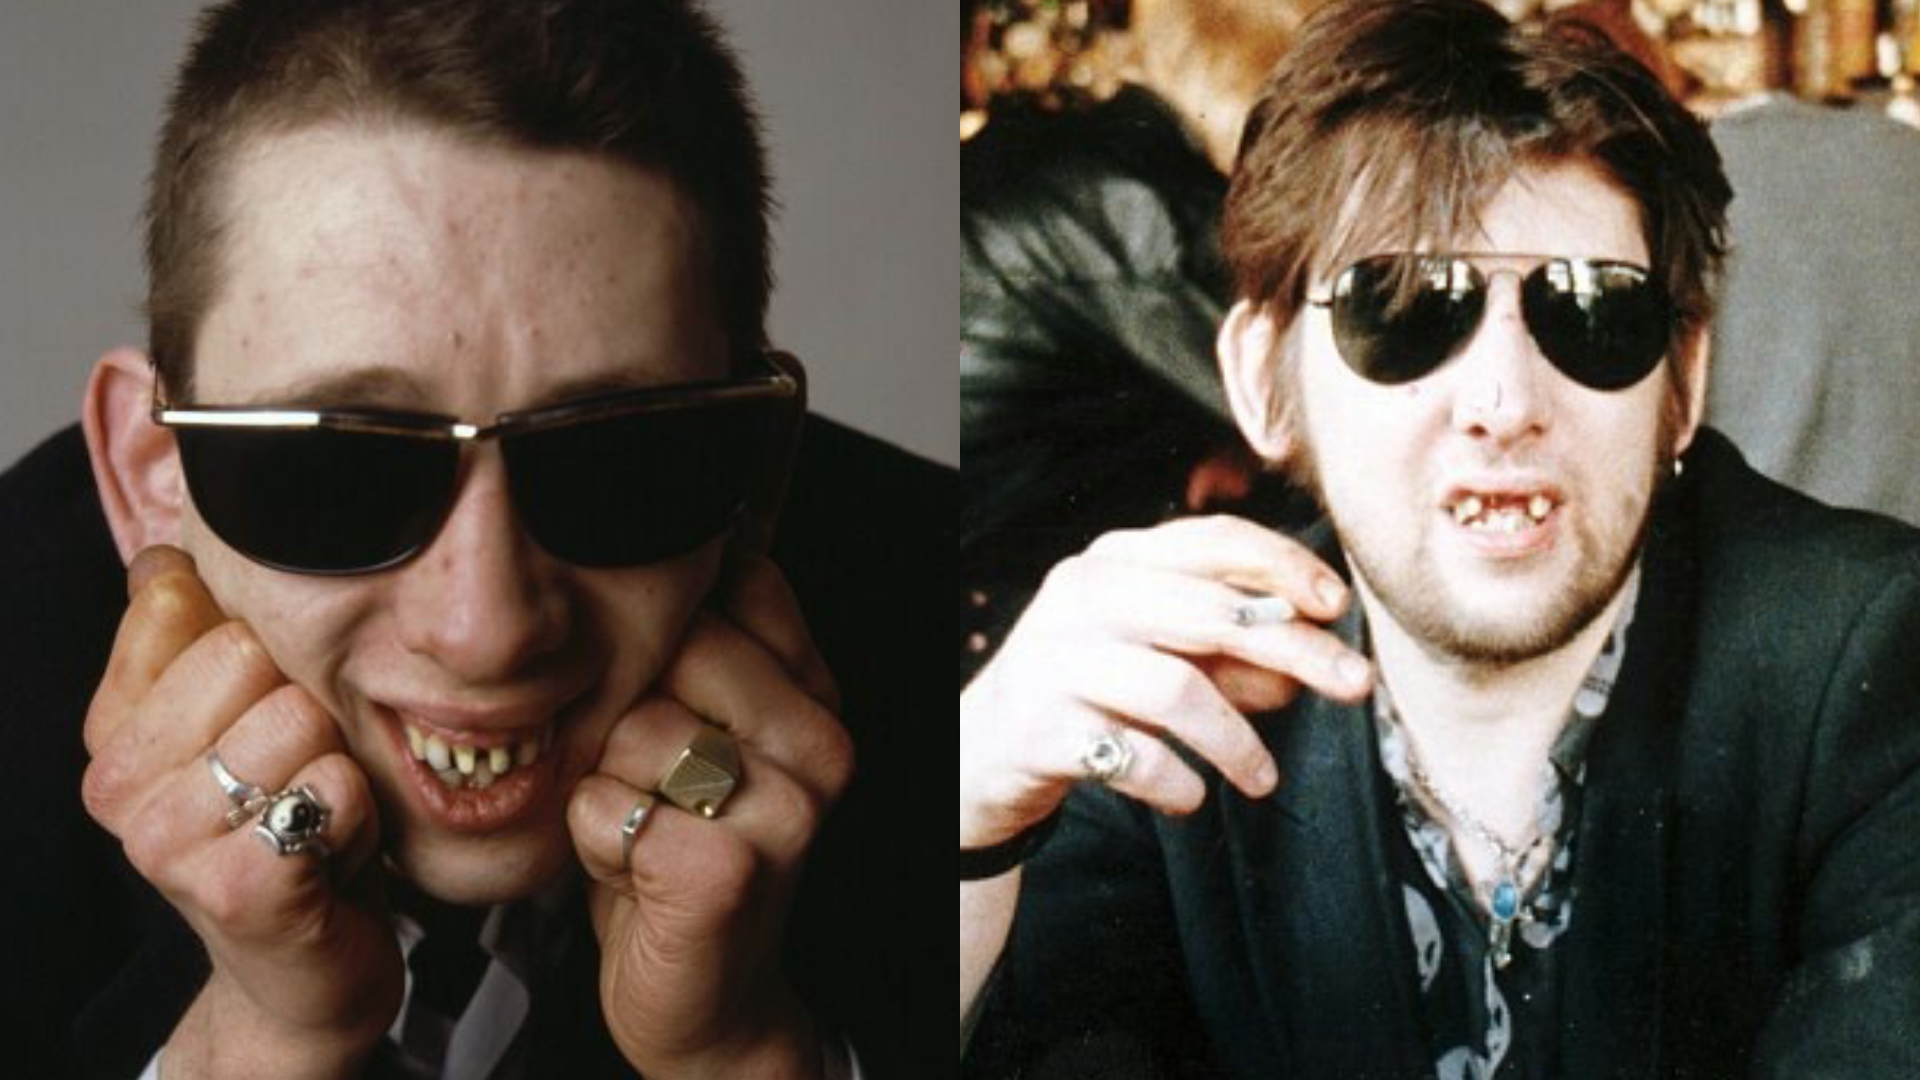 Shane MacGowan biography, songs, wife, teeth, net worth and cause of death